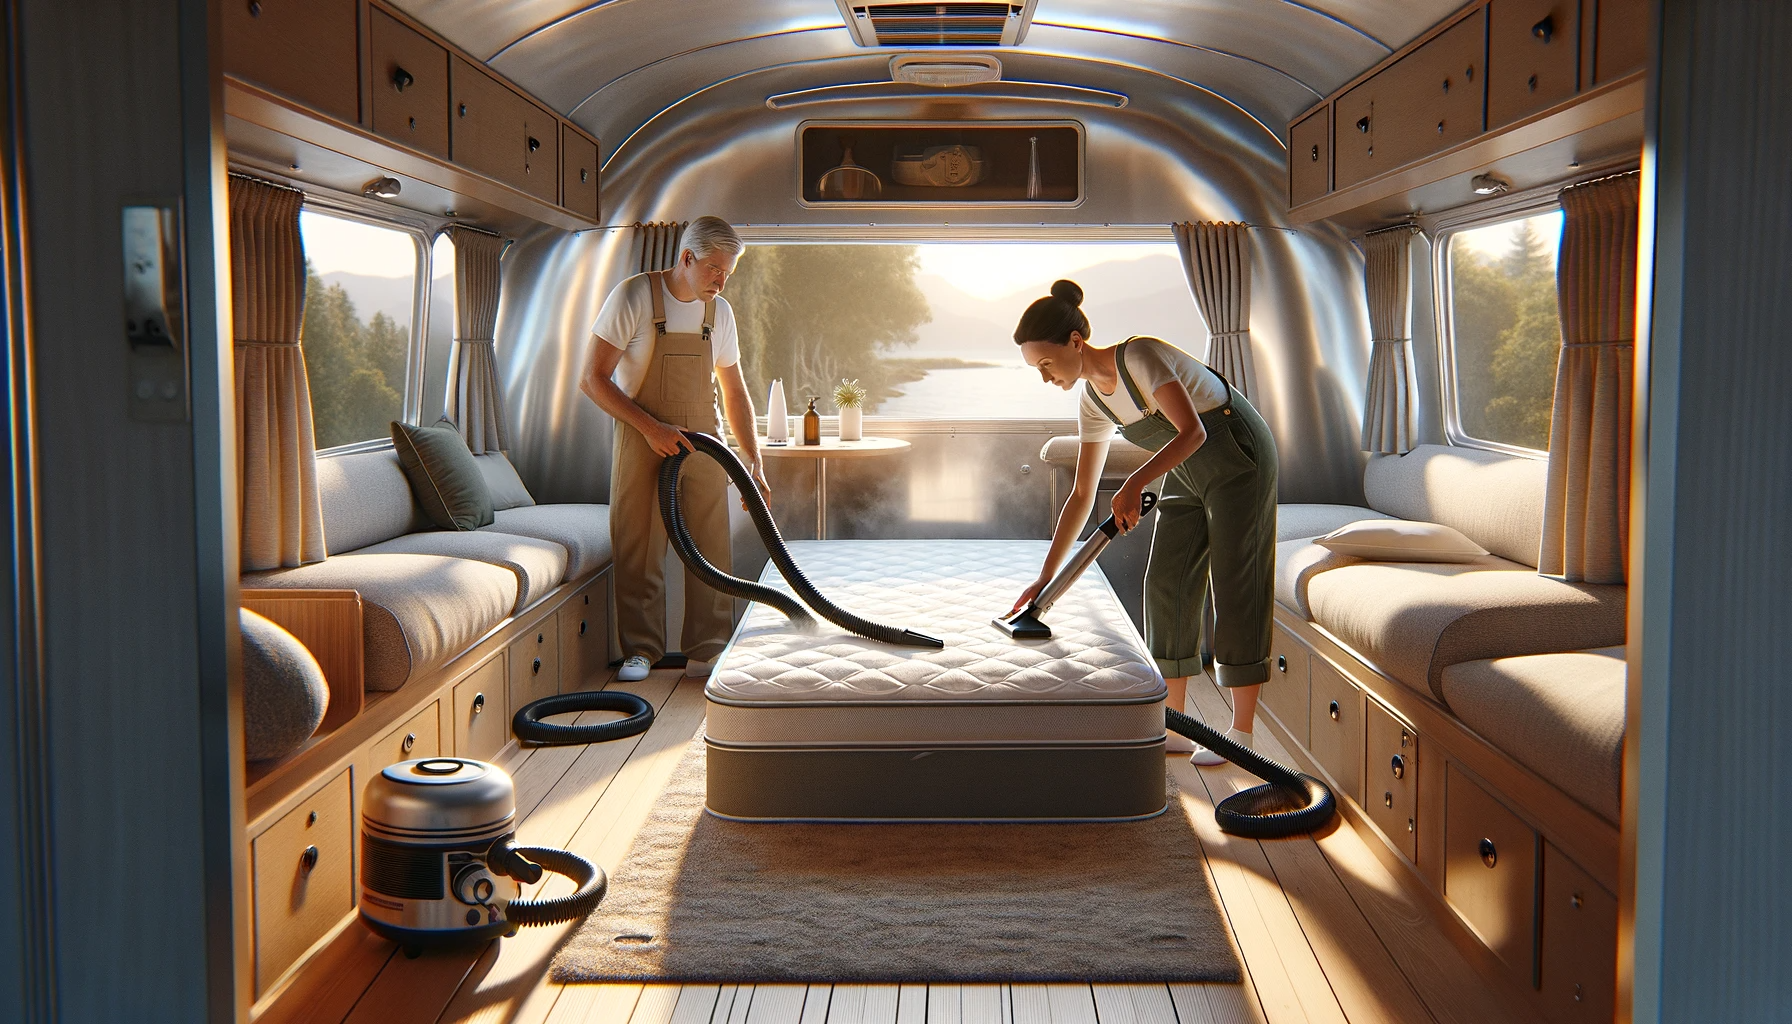 A woman engaging in the care and maintenance of a mattress inside an Airstream caravan, performing tasks like vacuuming and applying a protective cover, showcasing the essential practices for ensuring a clean, hygienic, and comfortable travel experience